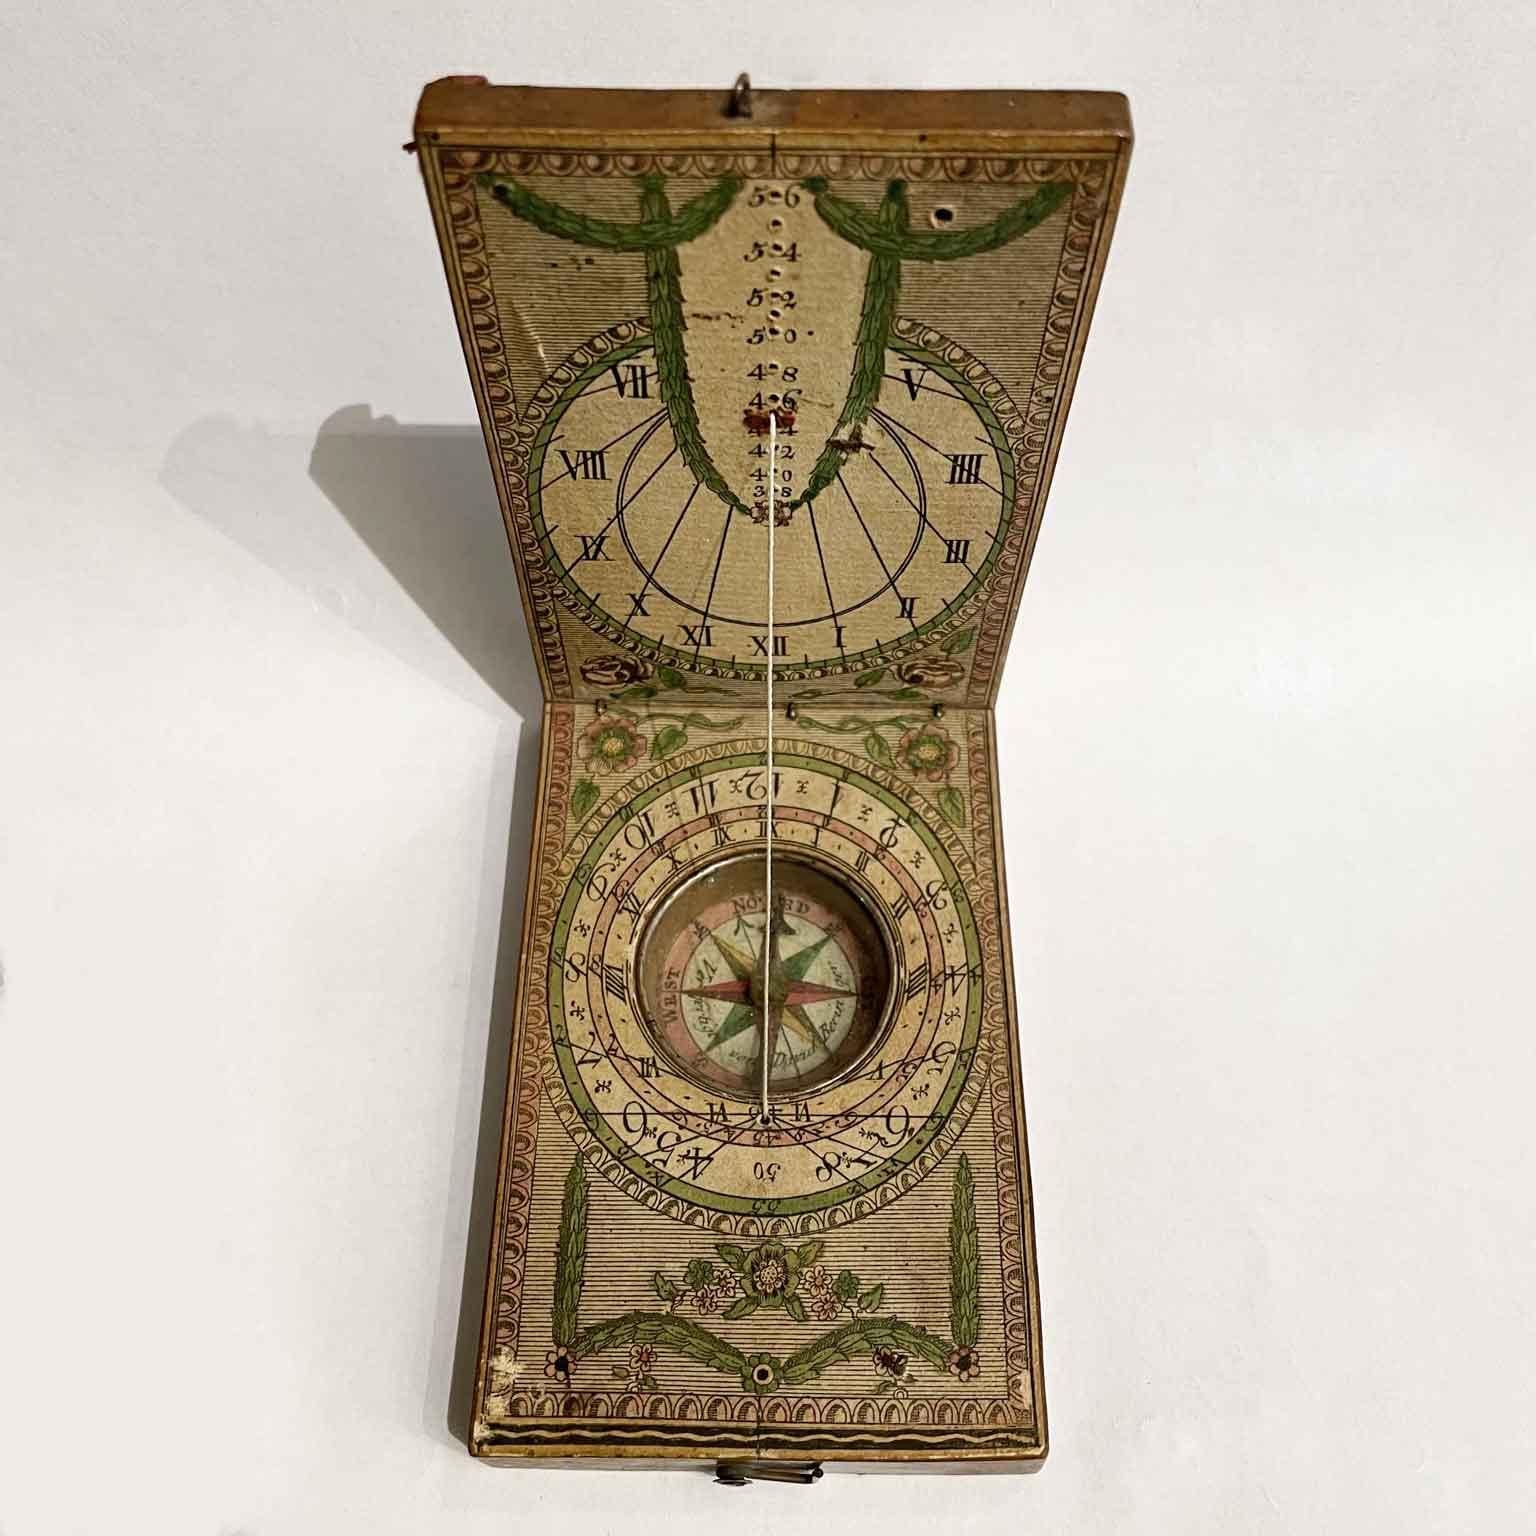 Antique 18th Century Diptych Sundial and Compass a portable wooden boxwood sundial with compass, of German origin, by David Beringer, Nuremberg, dating back to the 1790 circa, in good age related condition, with signs of wear consistent with age and